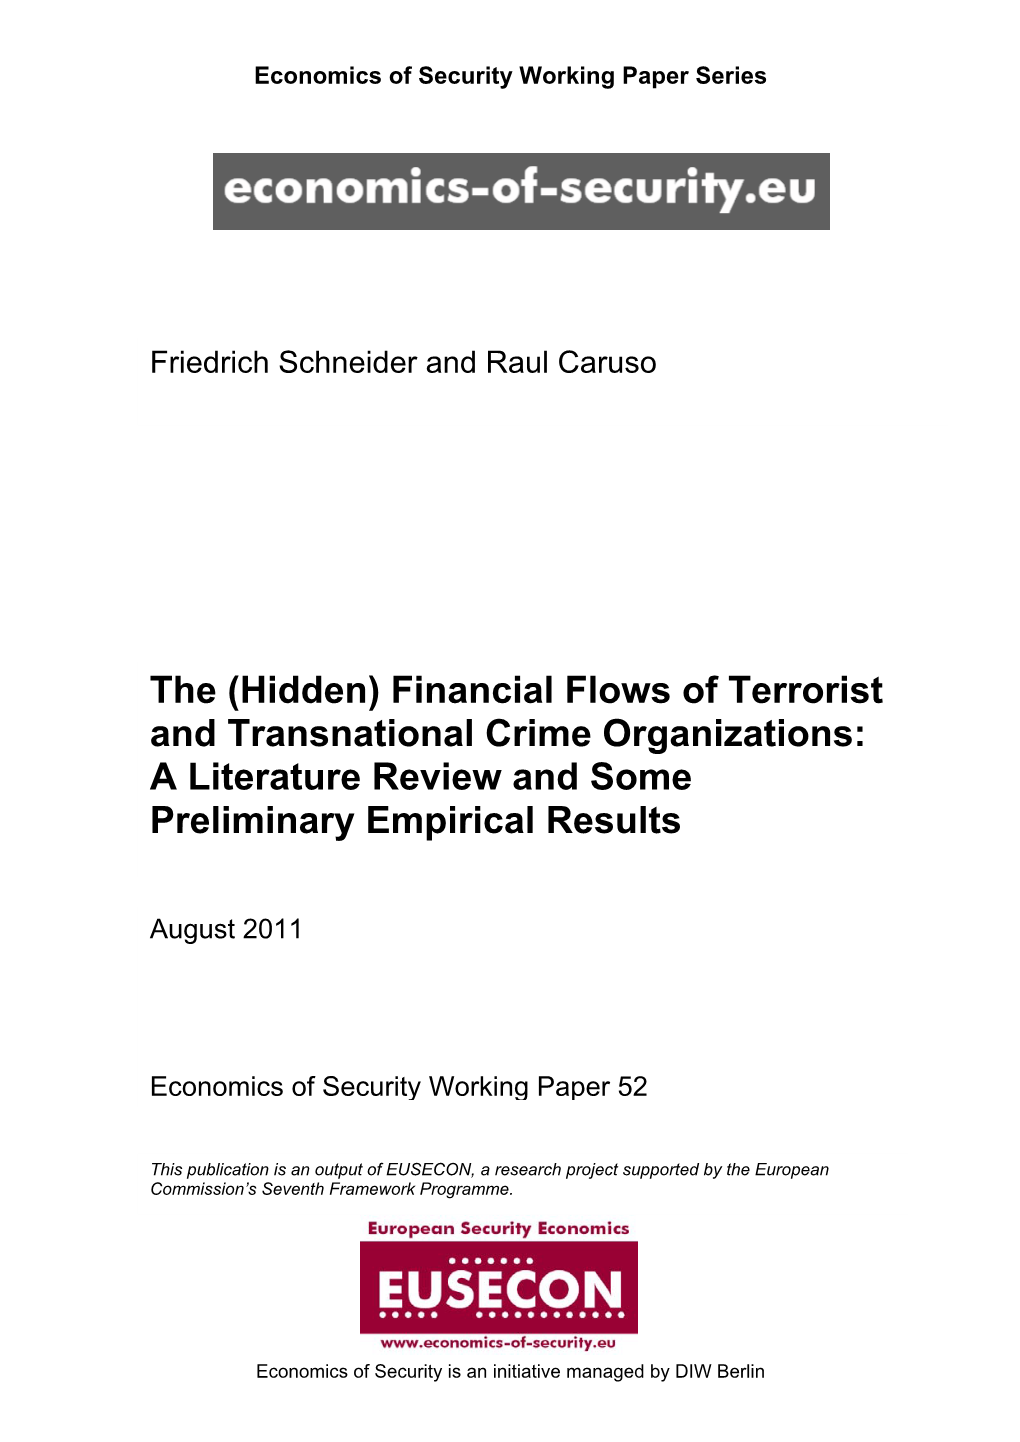 Financial Flows of Terrorist and Transnational Crime Organizations